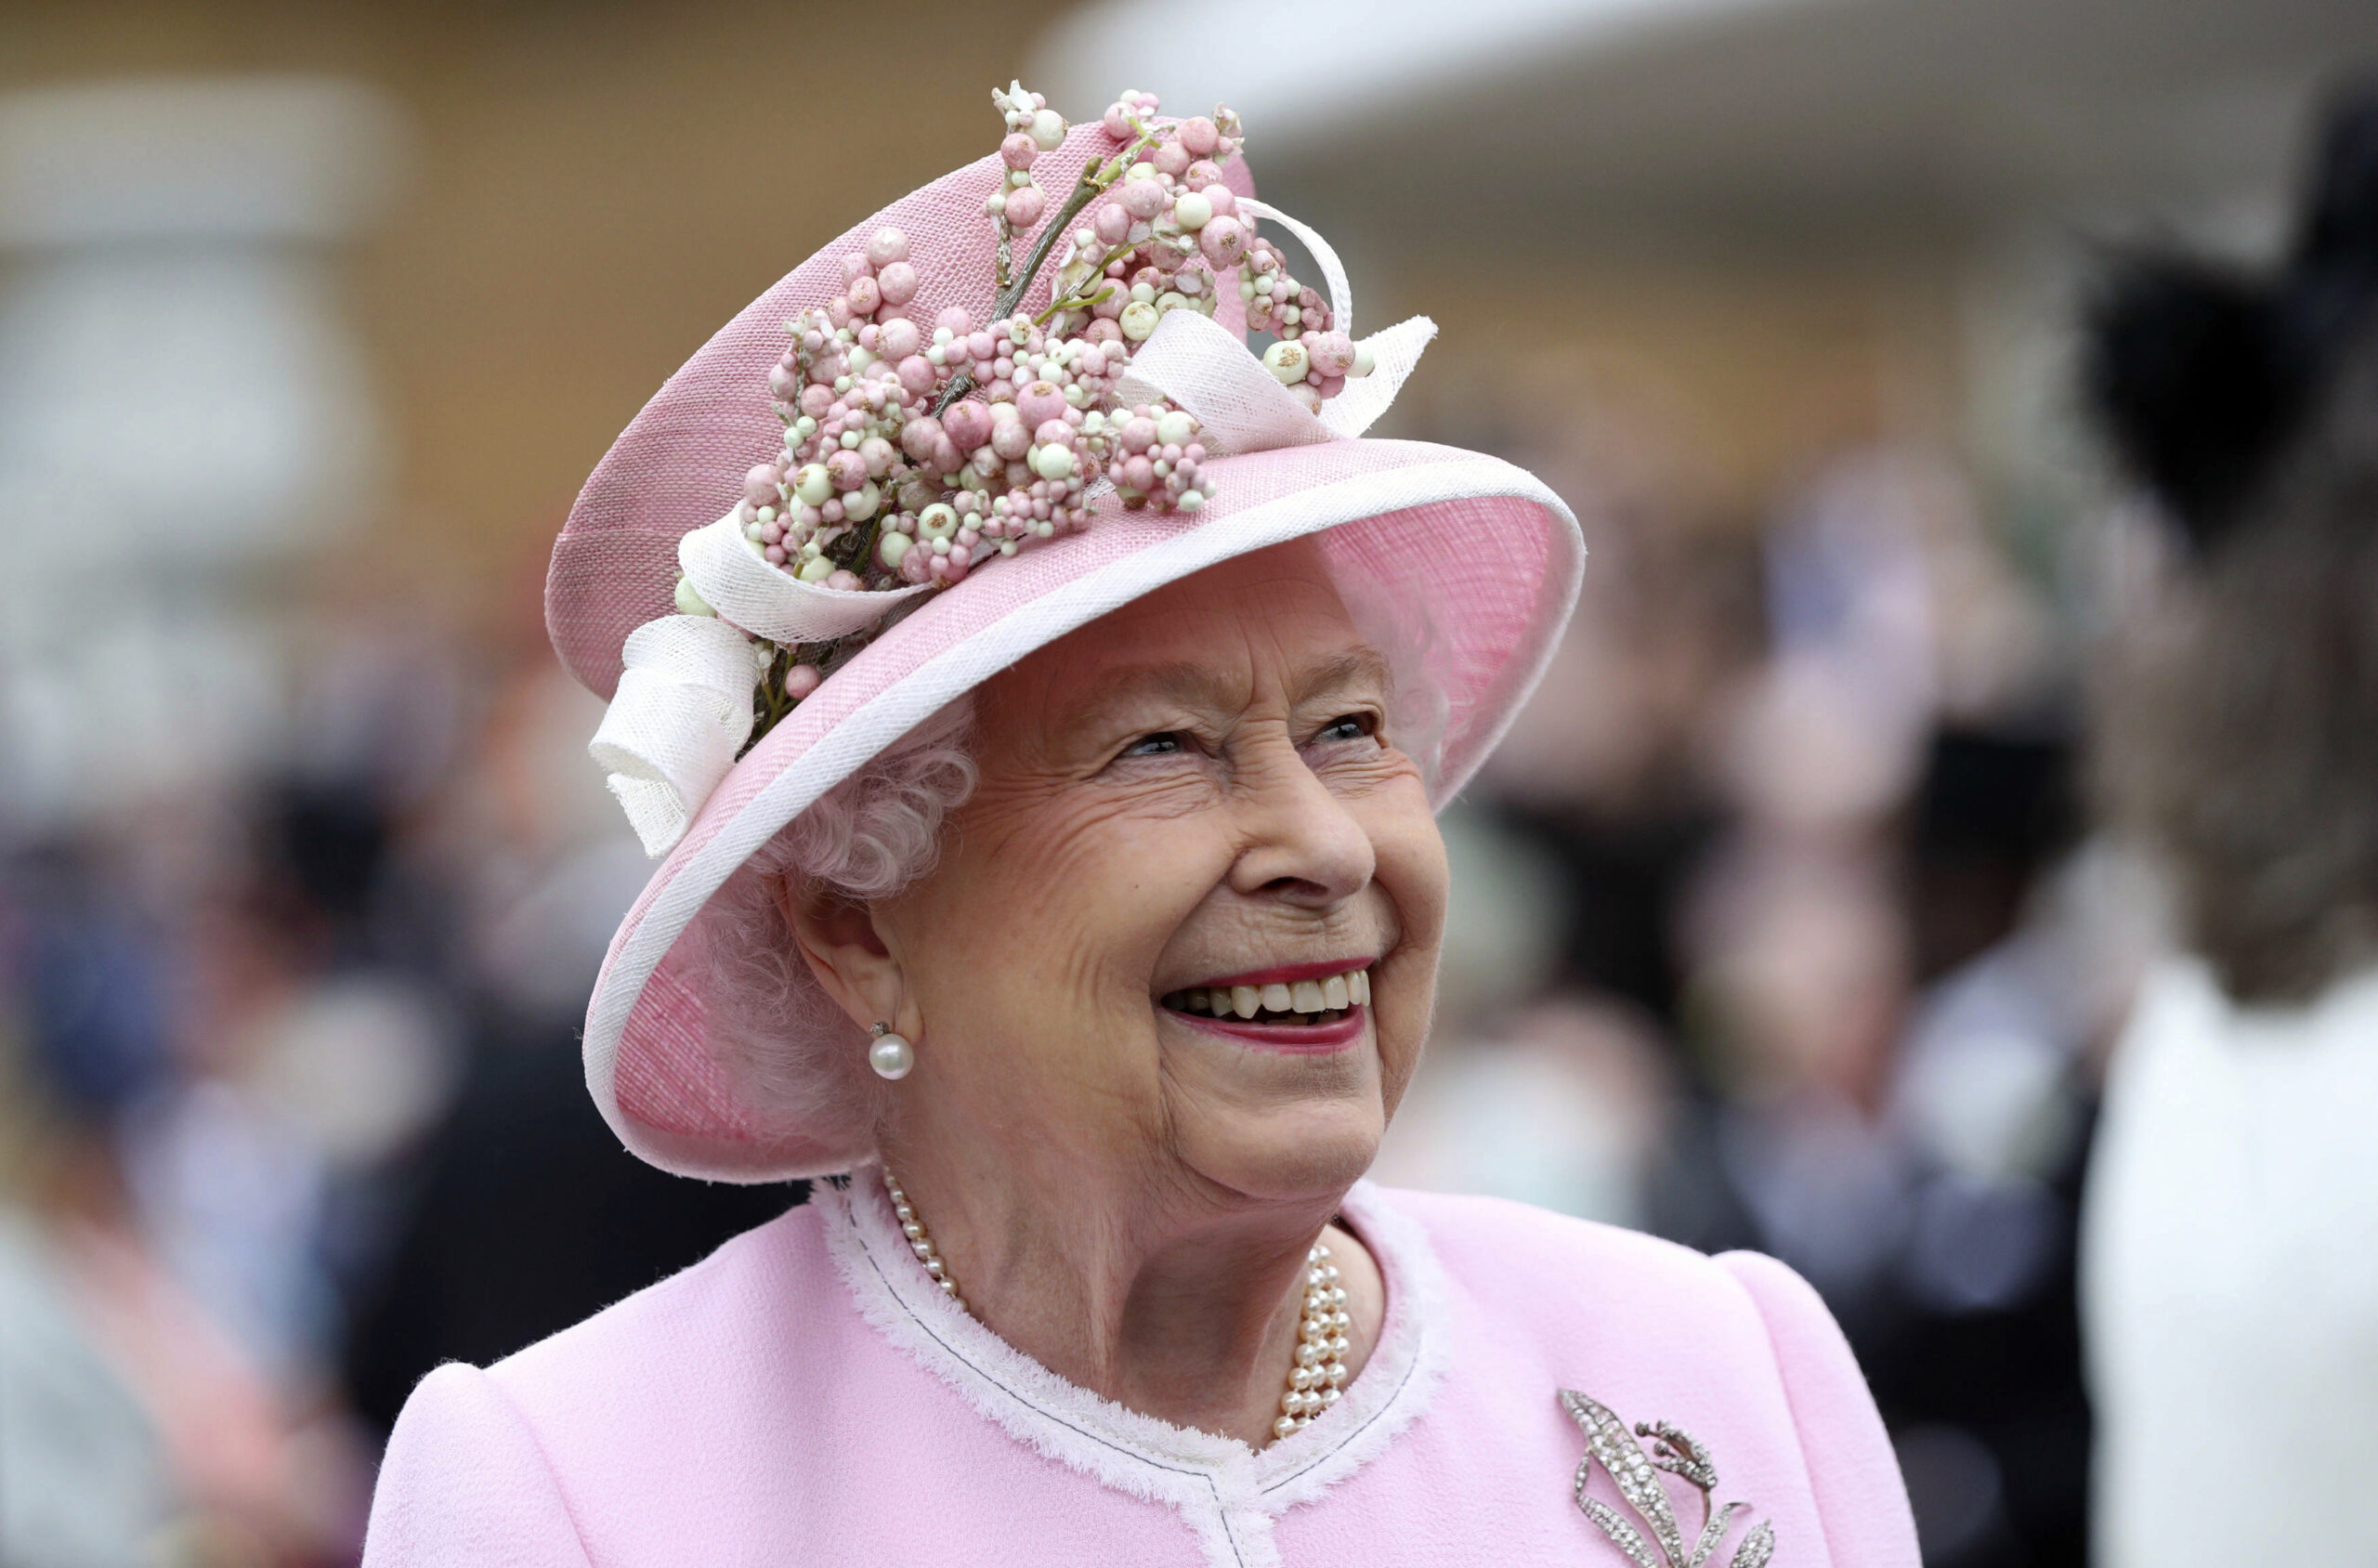 FILE - Britain's Queen Elizabeth arrives for a Royal Garden Party at Buckingham Palace in London, Wednesday, May 29, 2019. Queen Elizabeth II will miss the traditional royal garden party season, where she would normally meet with hundreds of people on the grounds of her residences in London and Edinburgh. The 96-year-old monarch will be represented instead by other members of her family, Buckingham Palace said in a statement. Before the pandemic, the queen invited over 30,000 people each year to the gardens of Buckingham Palace or the Palace of Holyroodhouse in Edinburgh. (Yui Mok/Pool Photo via AP, File)